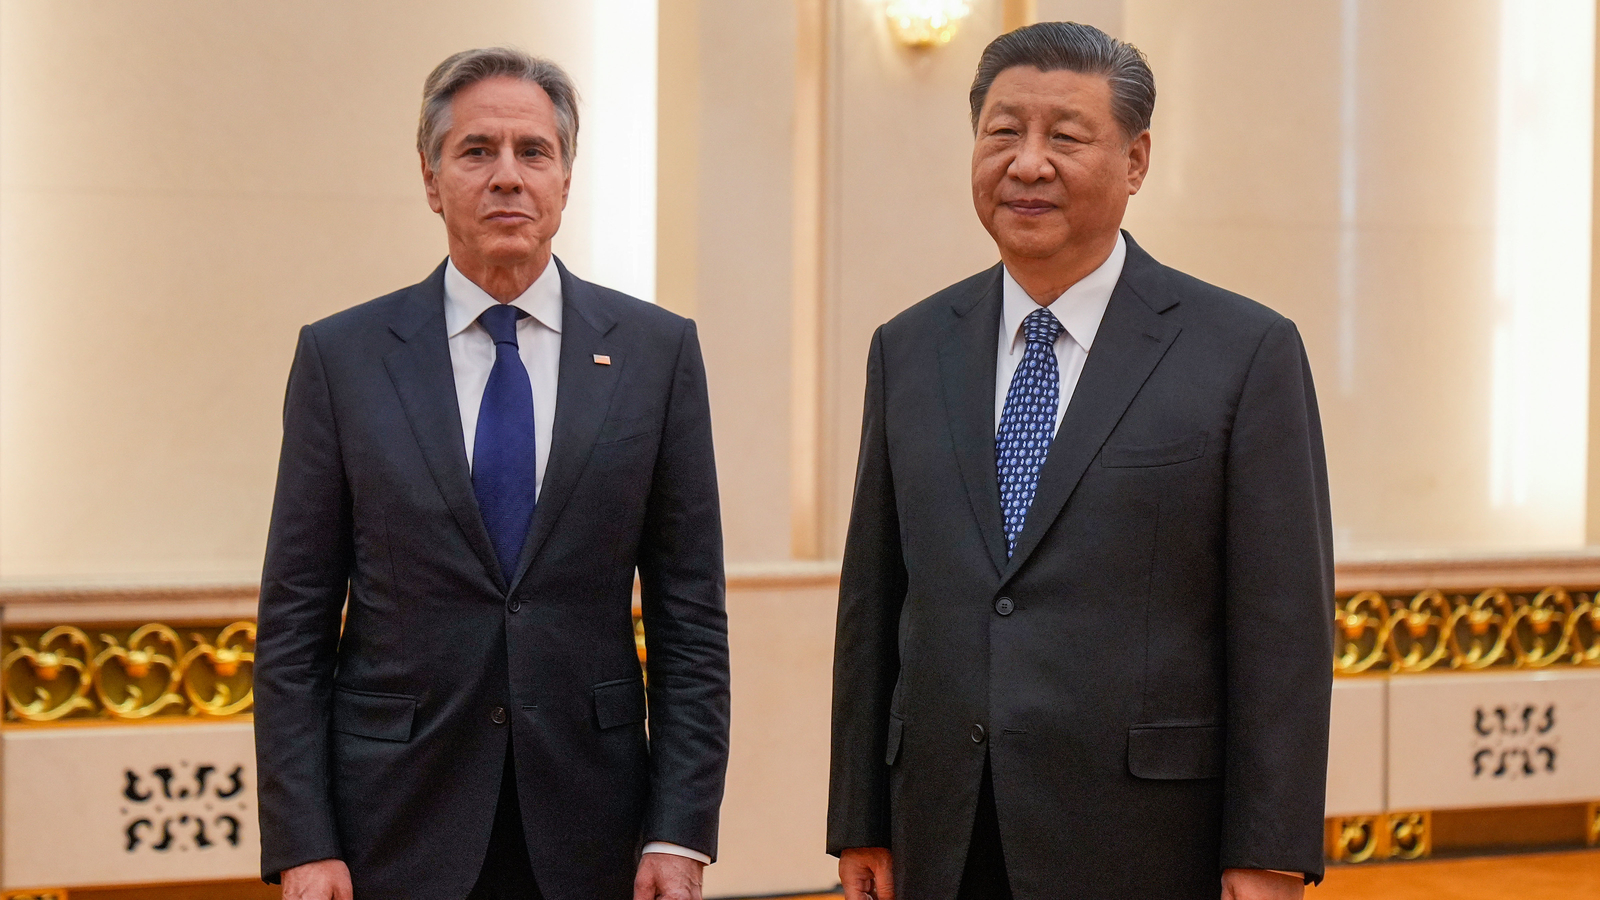 Antony Blinken meets with China’s President Xi as US, China spar over bilateral and global issues [Video]